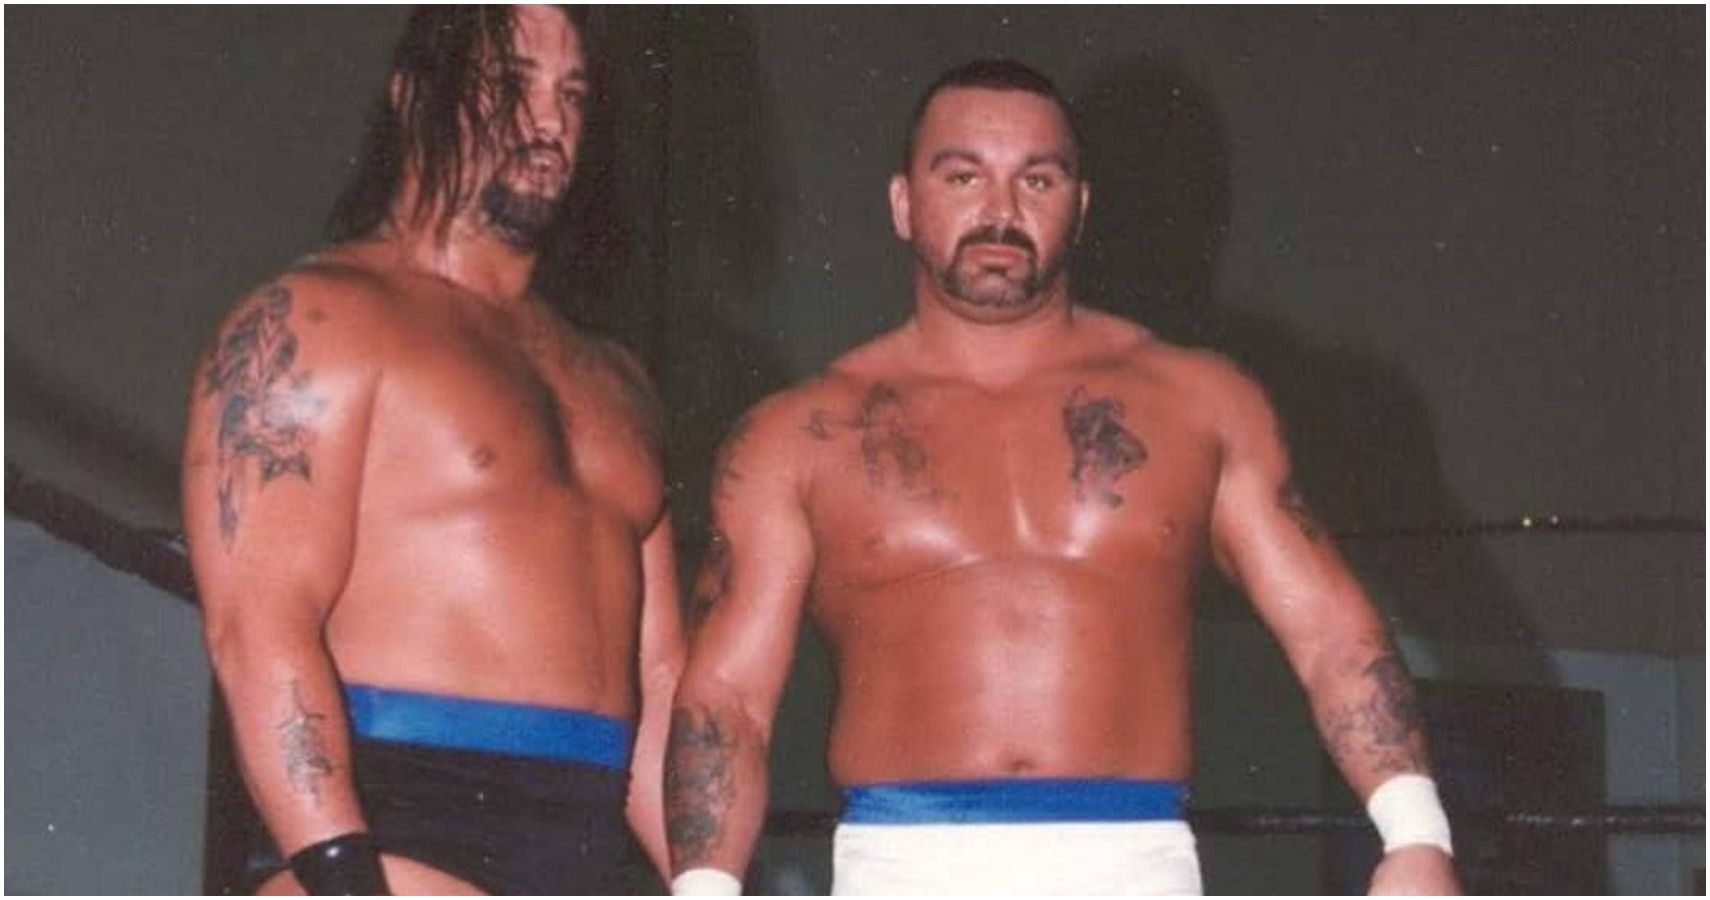 10 ECW Stars That Never Made it Big (But Should Have)